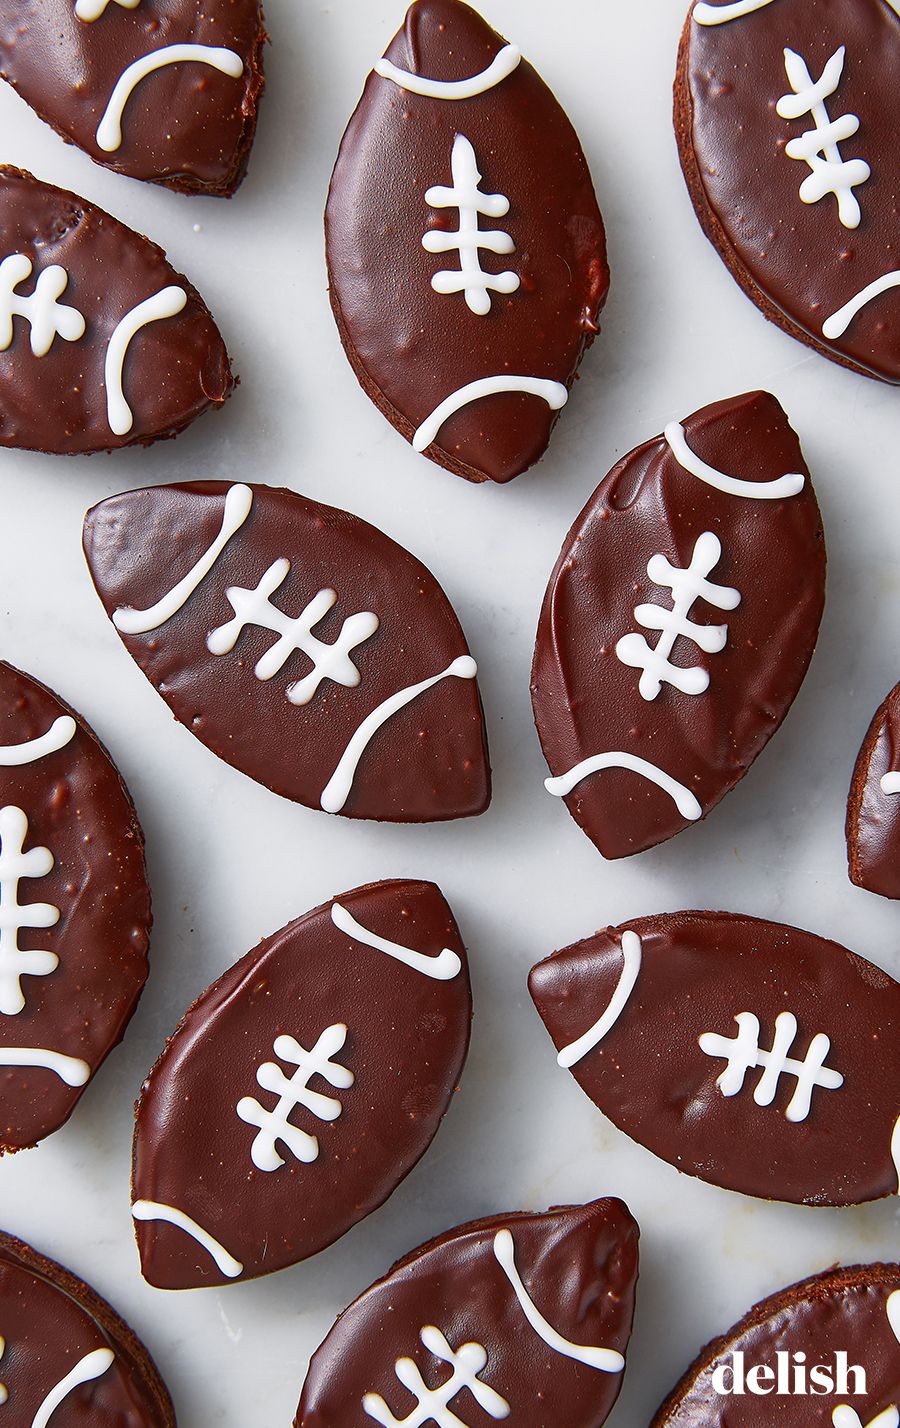 40 Desserts to Make Super Bowl Sunday Sweet, No Matter the Game's Outcome thumbnail